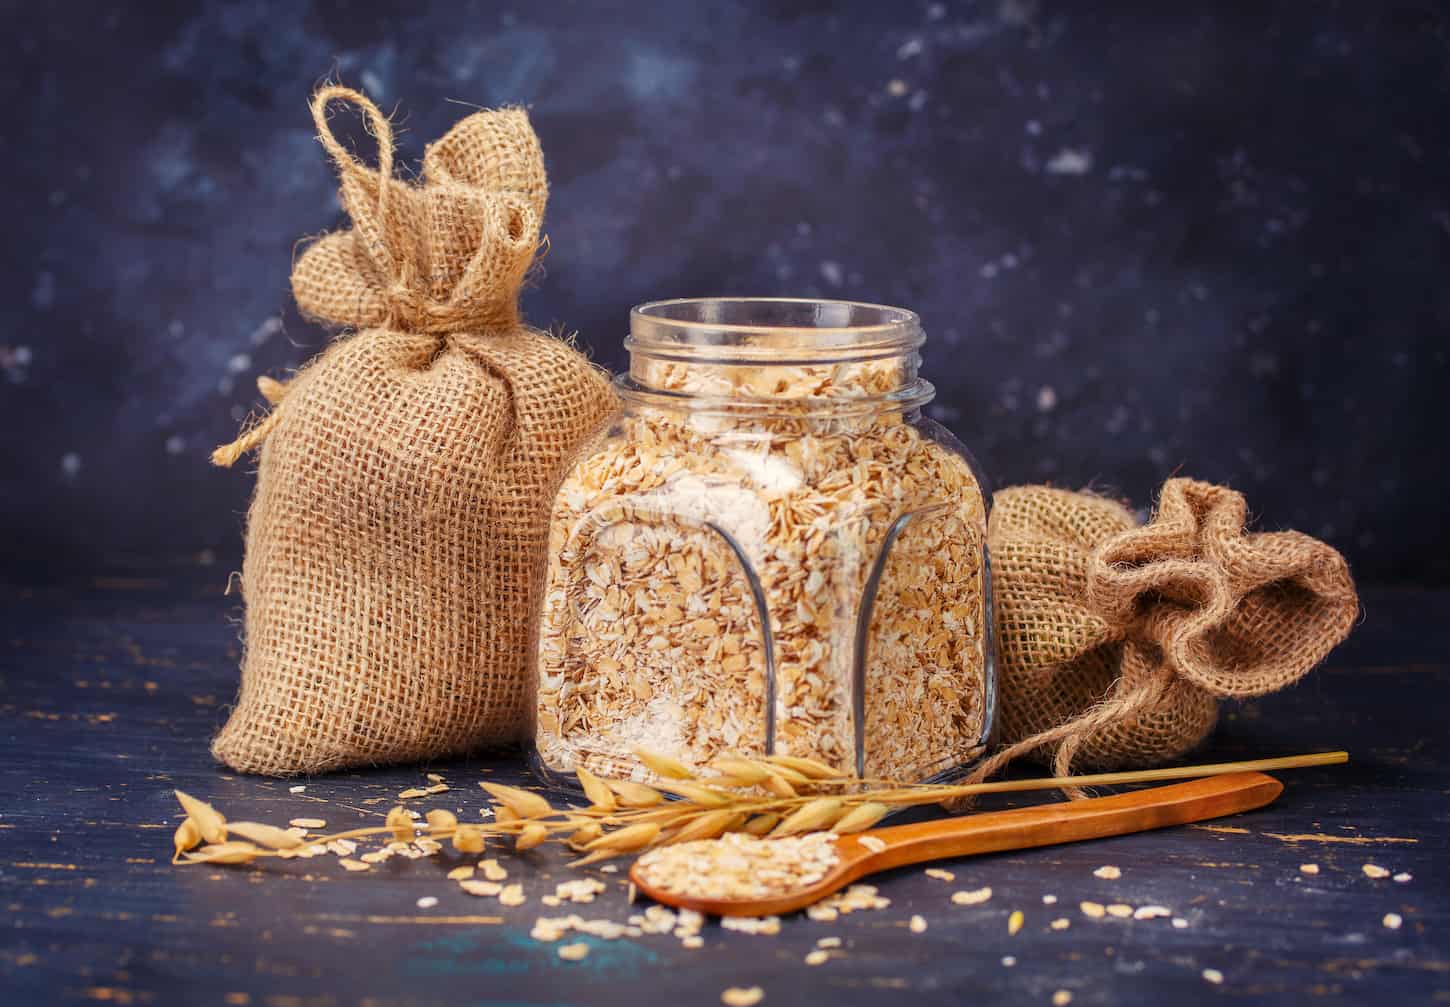 An image of Oatmeal in a glass jar and jute bags on a dark background.